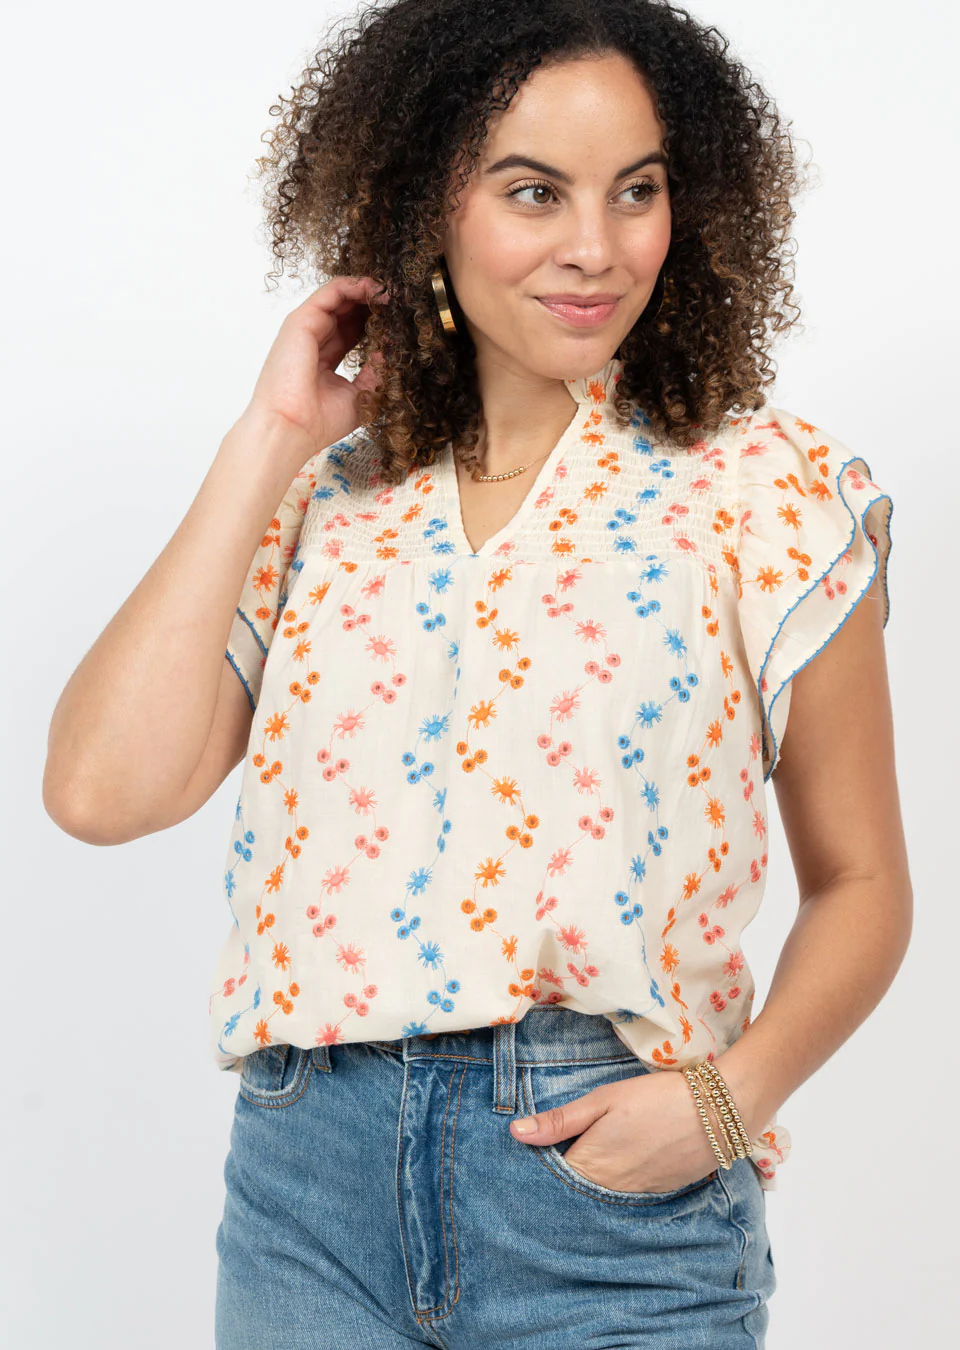 Over Easy Eyelet Top - Ivory